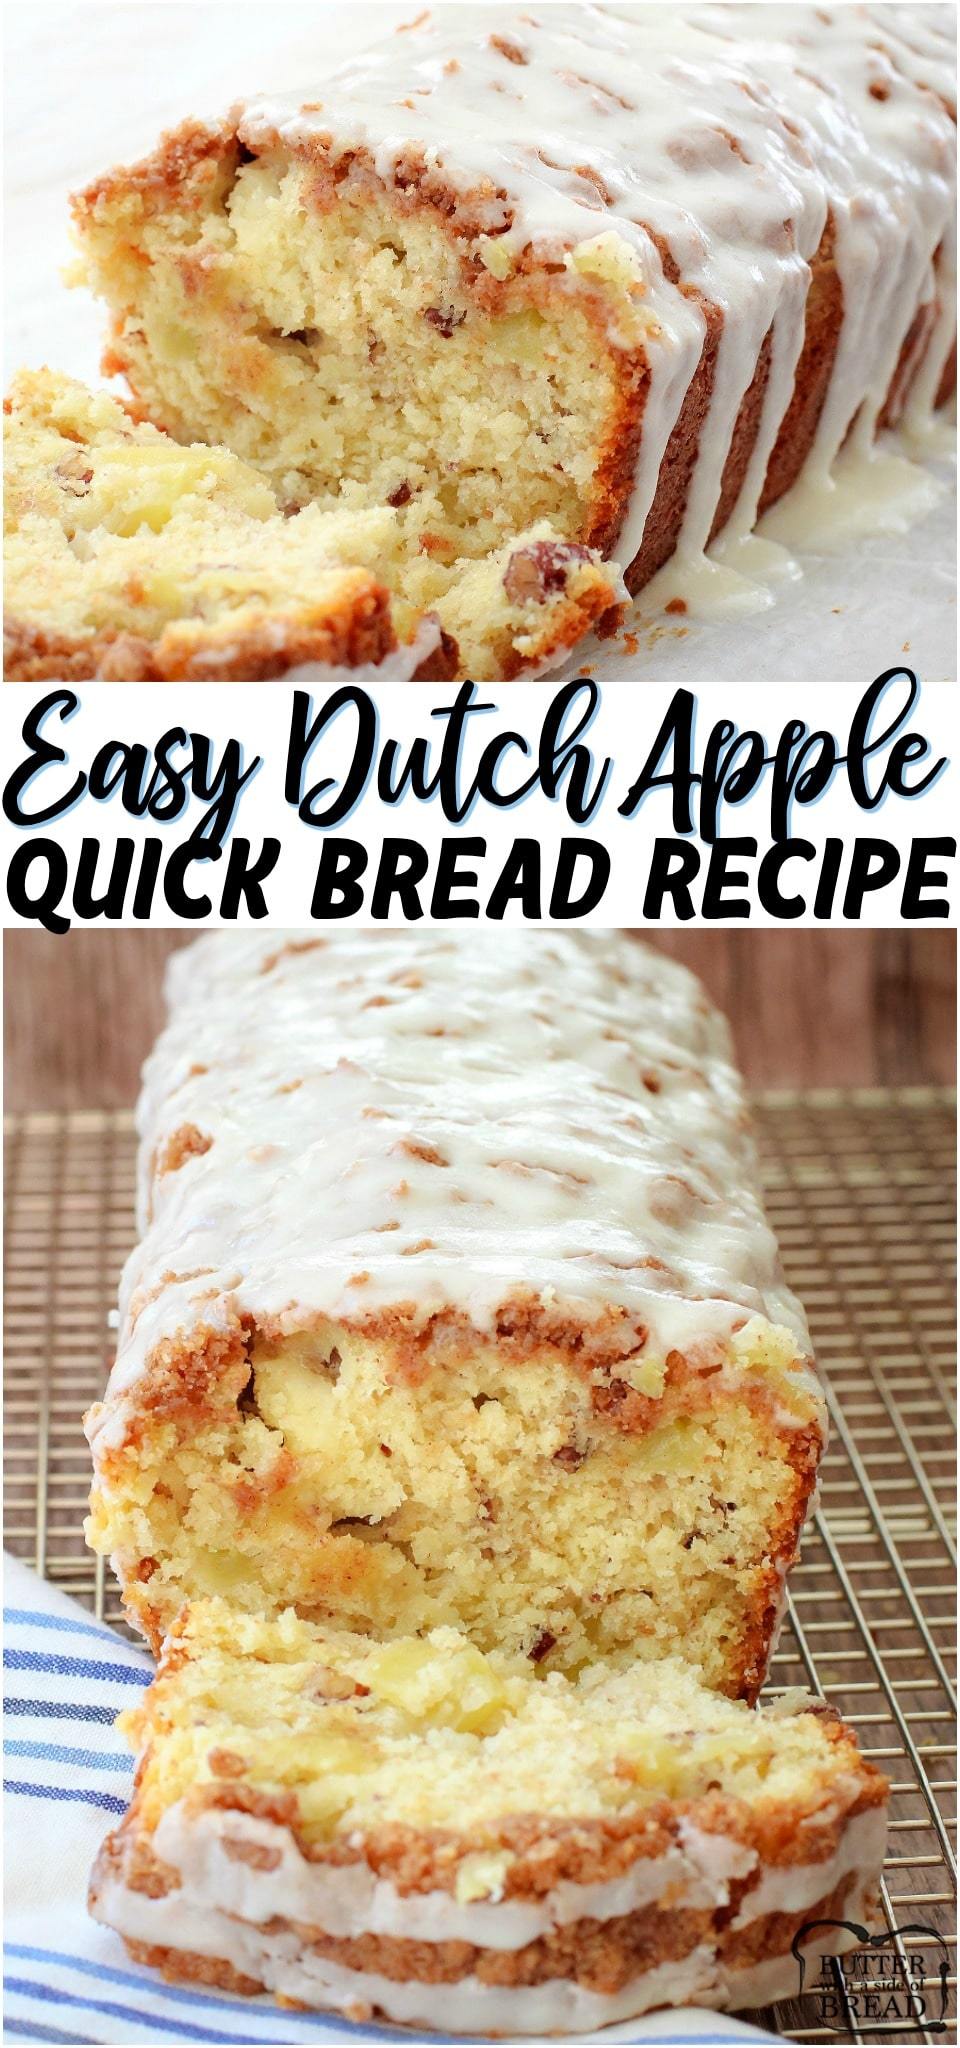 Dutch Apple Bread made from scratch with butter, sugar & fresh apples. Amazing flavor in this apple quick bread recipe topped with a cinnamon streusel & drizzled with warm vanilla glaze. #bread #quickbread #baking #apples #sweetbread #applerecipe #comfortfood from BUTTER WITH A SIDE OF BREAD